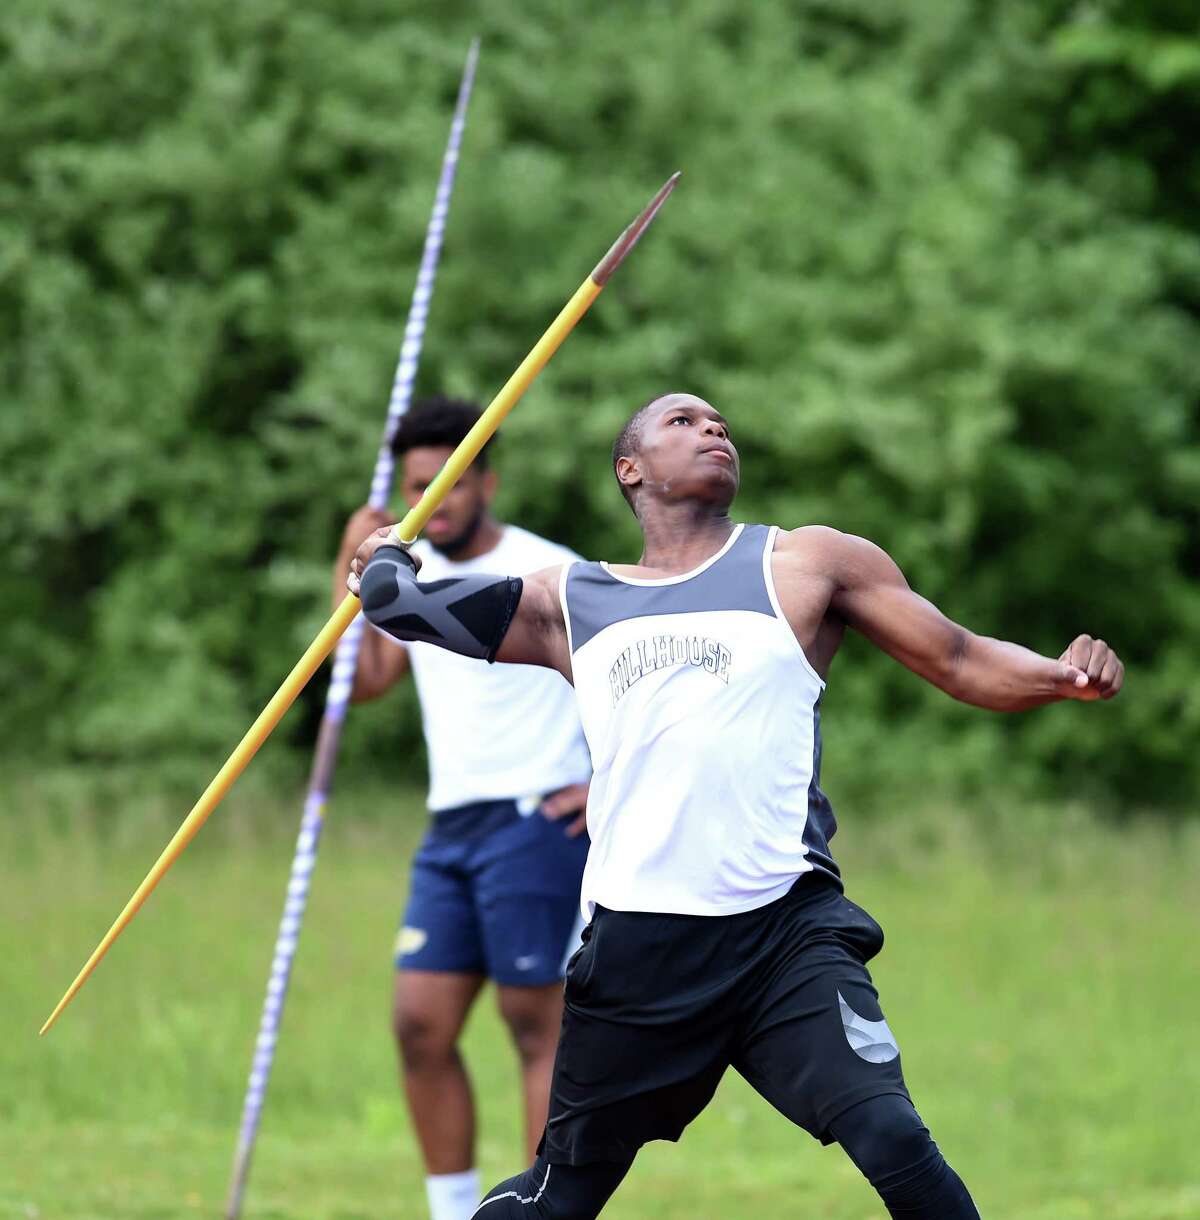 Hillhouse’s Gary Moore, Jr., throws the javelin during the Class MM outdoor track and field championship on May 29 at Middletown High.